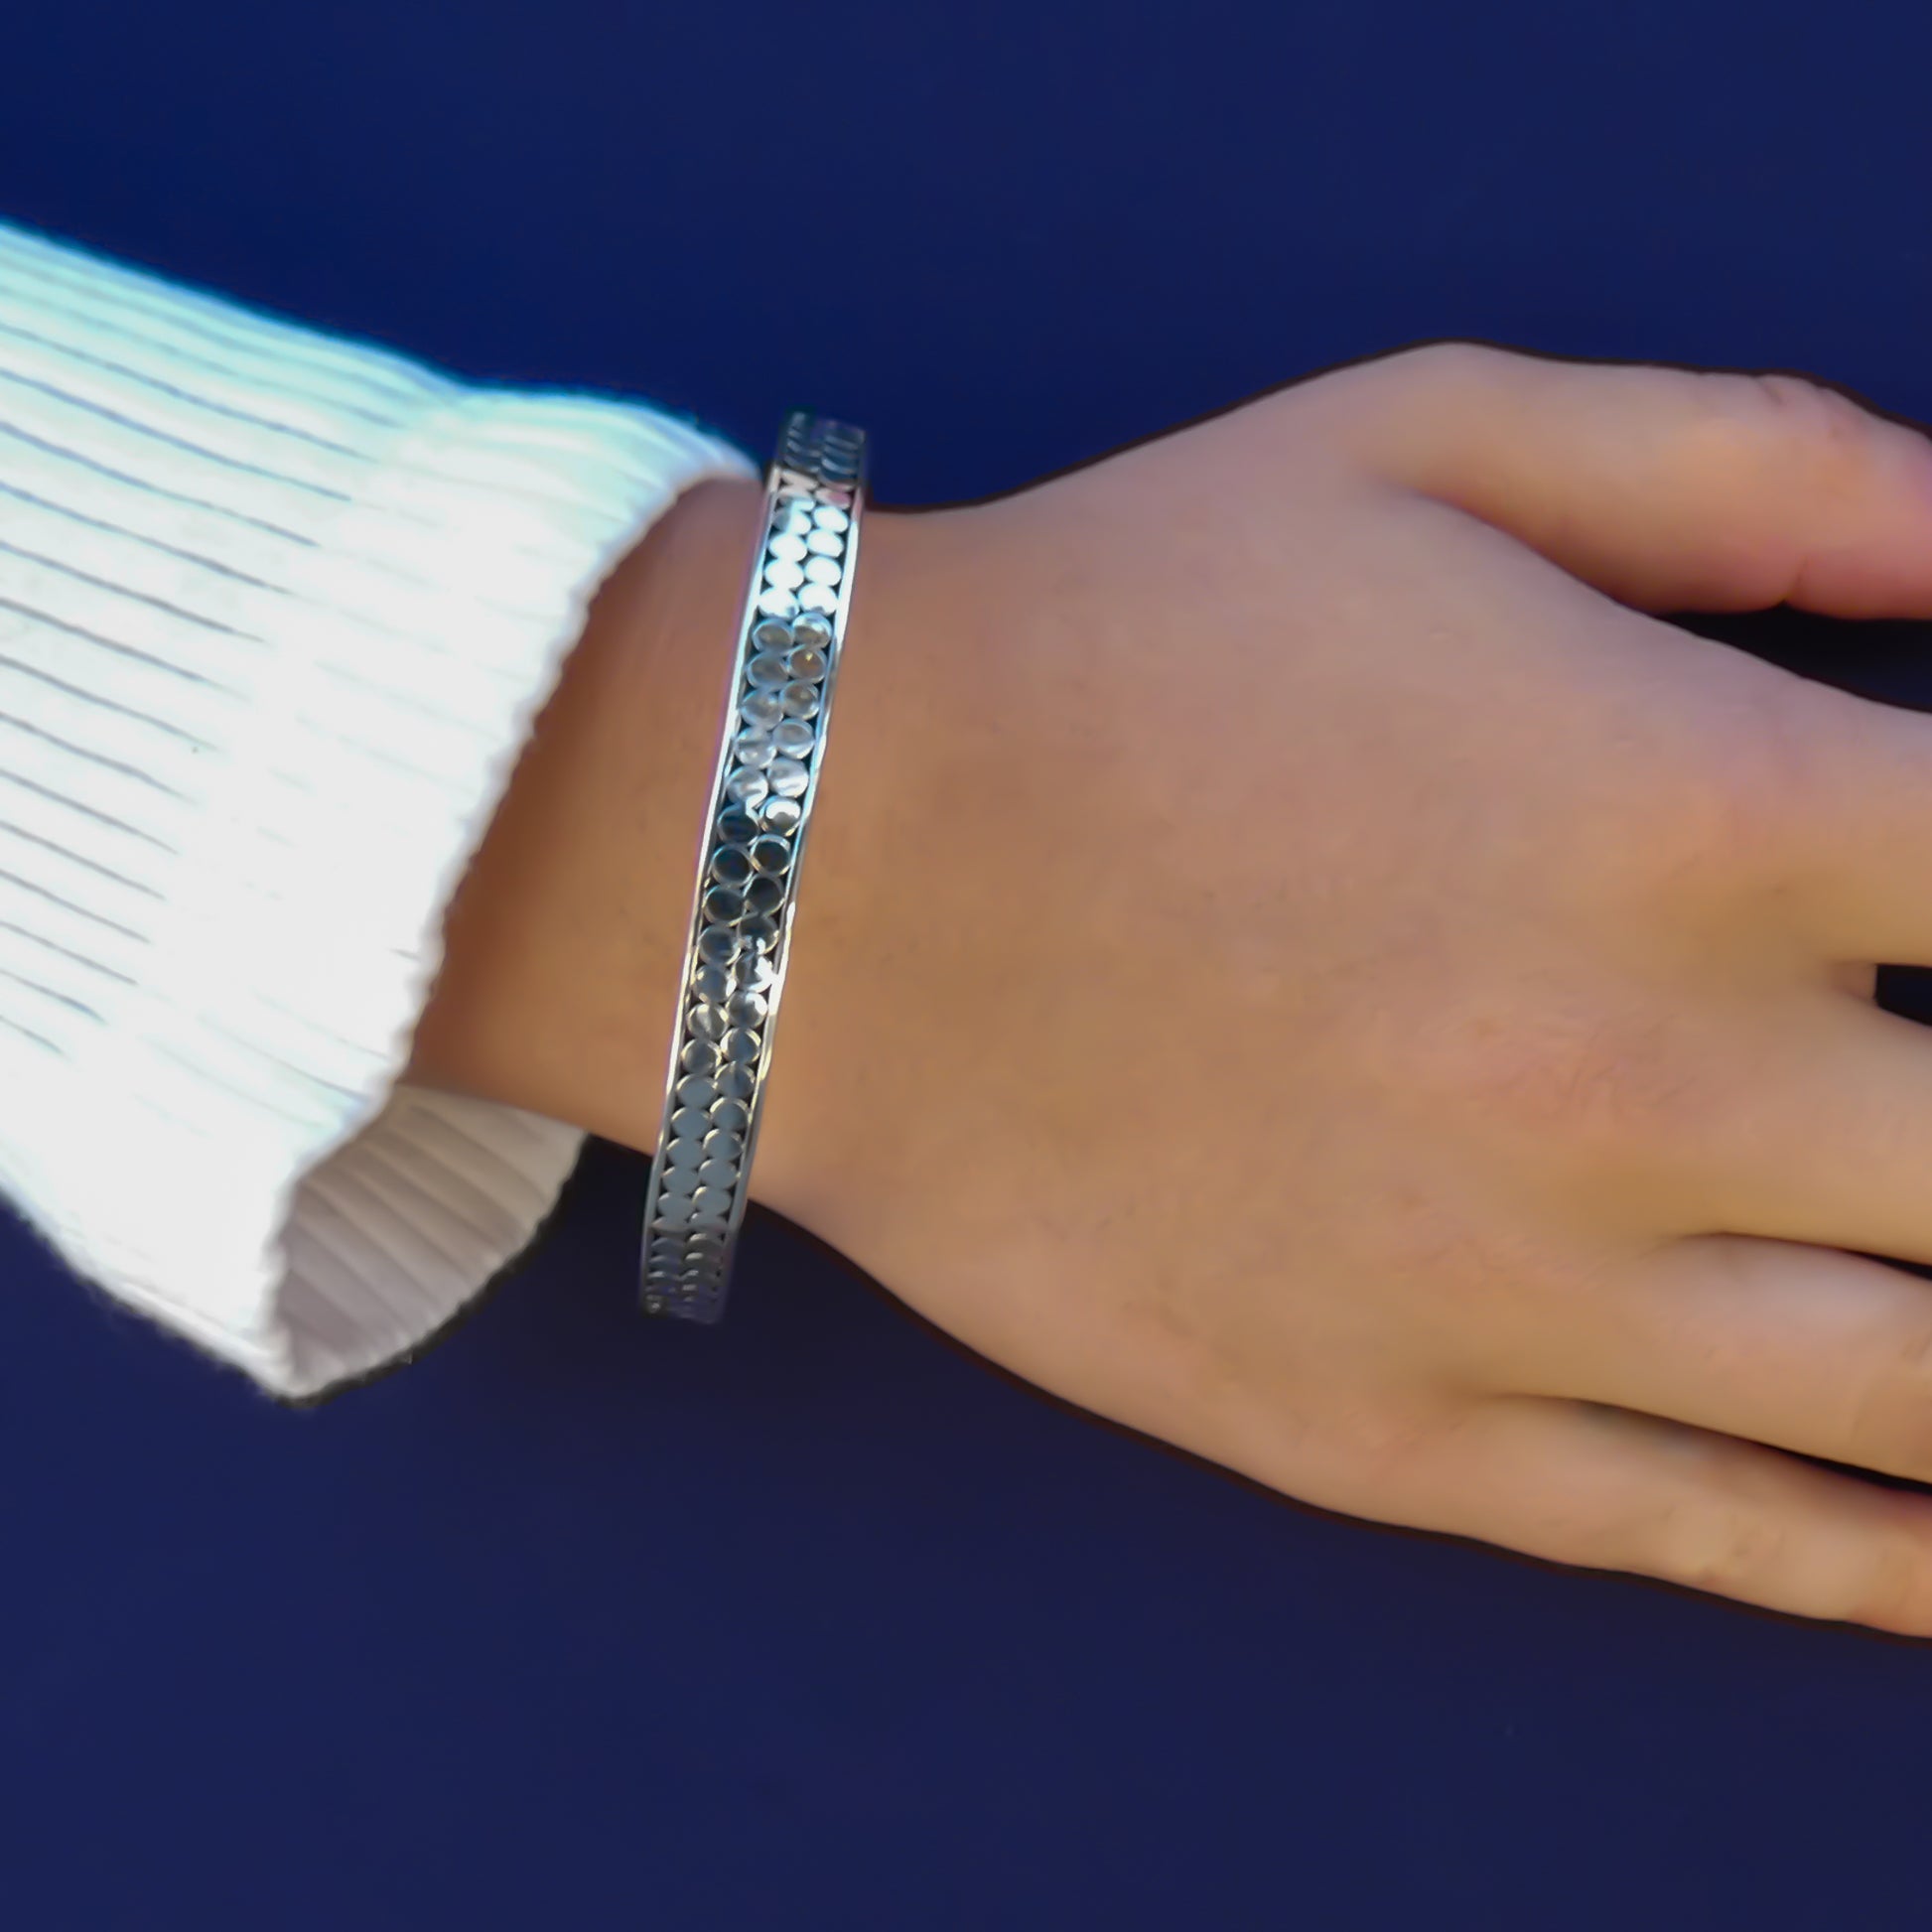 Woman wearing a silver bangle bracelet with two rows of flat silver dots.